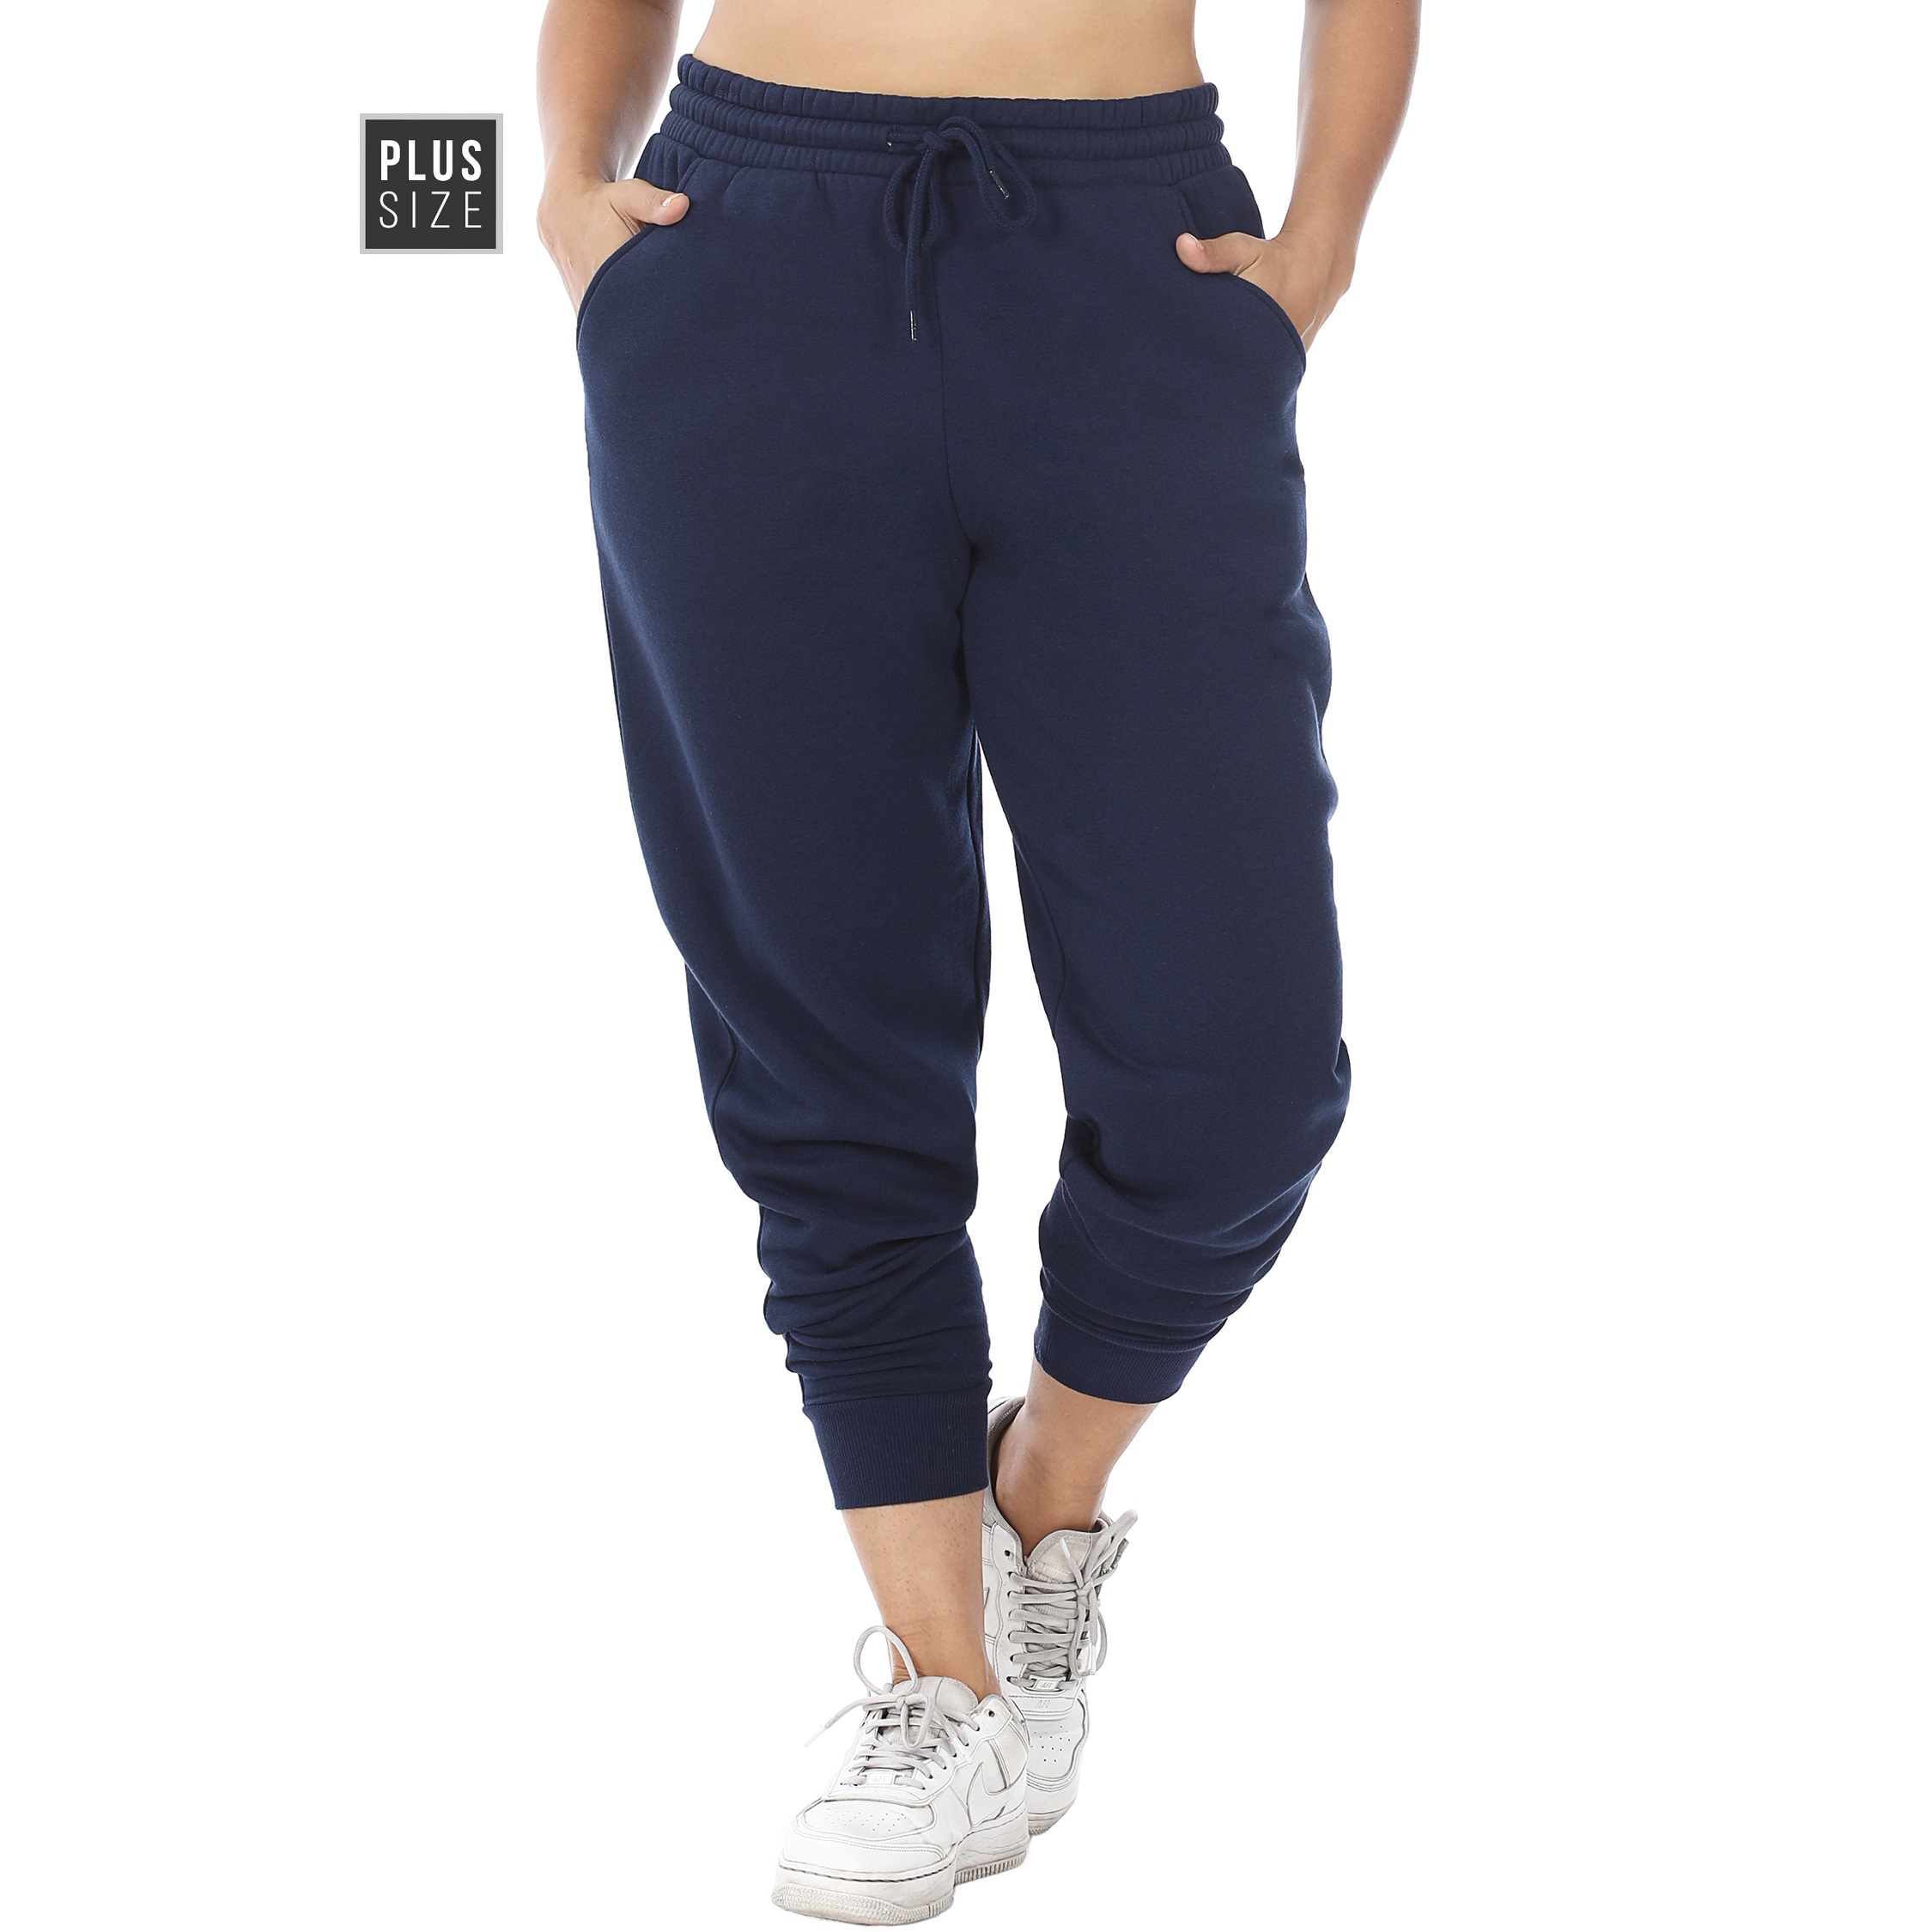 Women's Plus Size Sweatpants Joggers - Workout Pants Loose Fit Relaxed ...